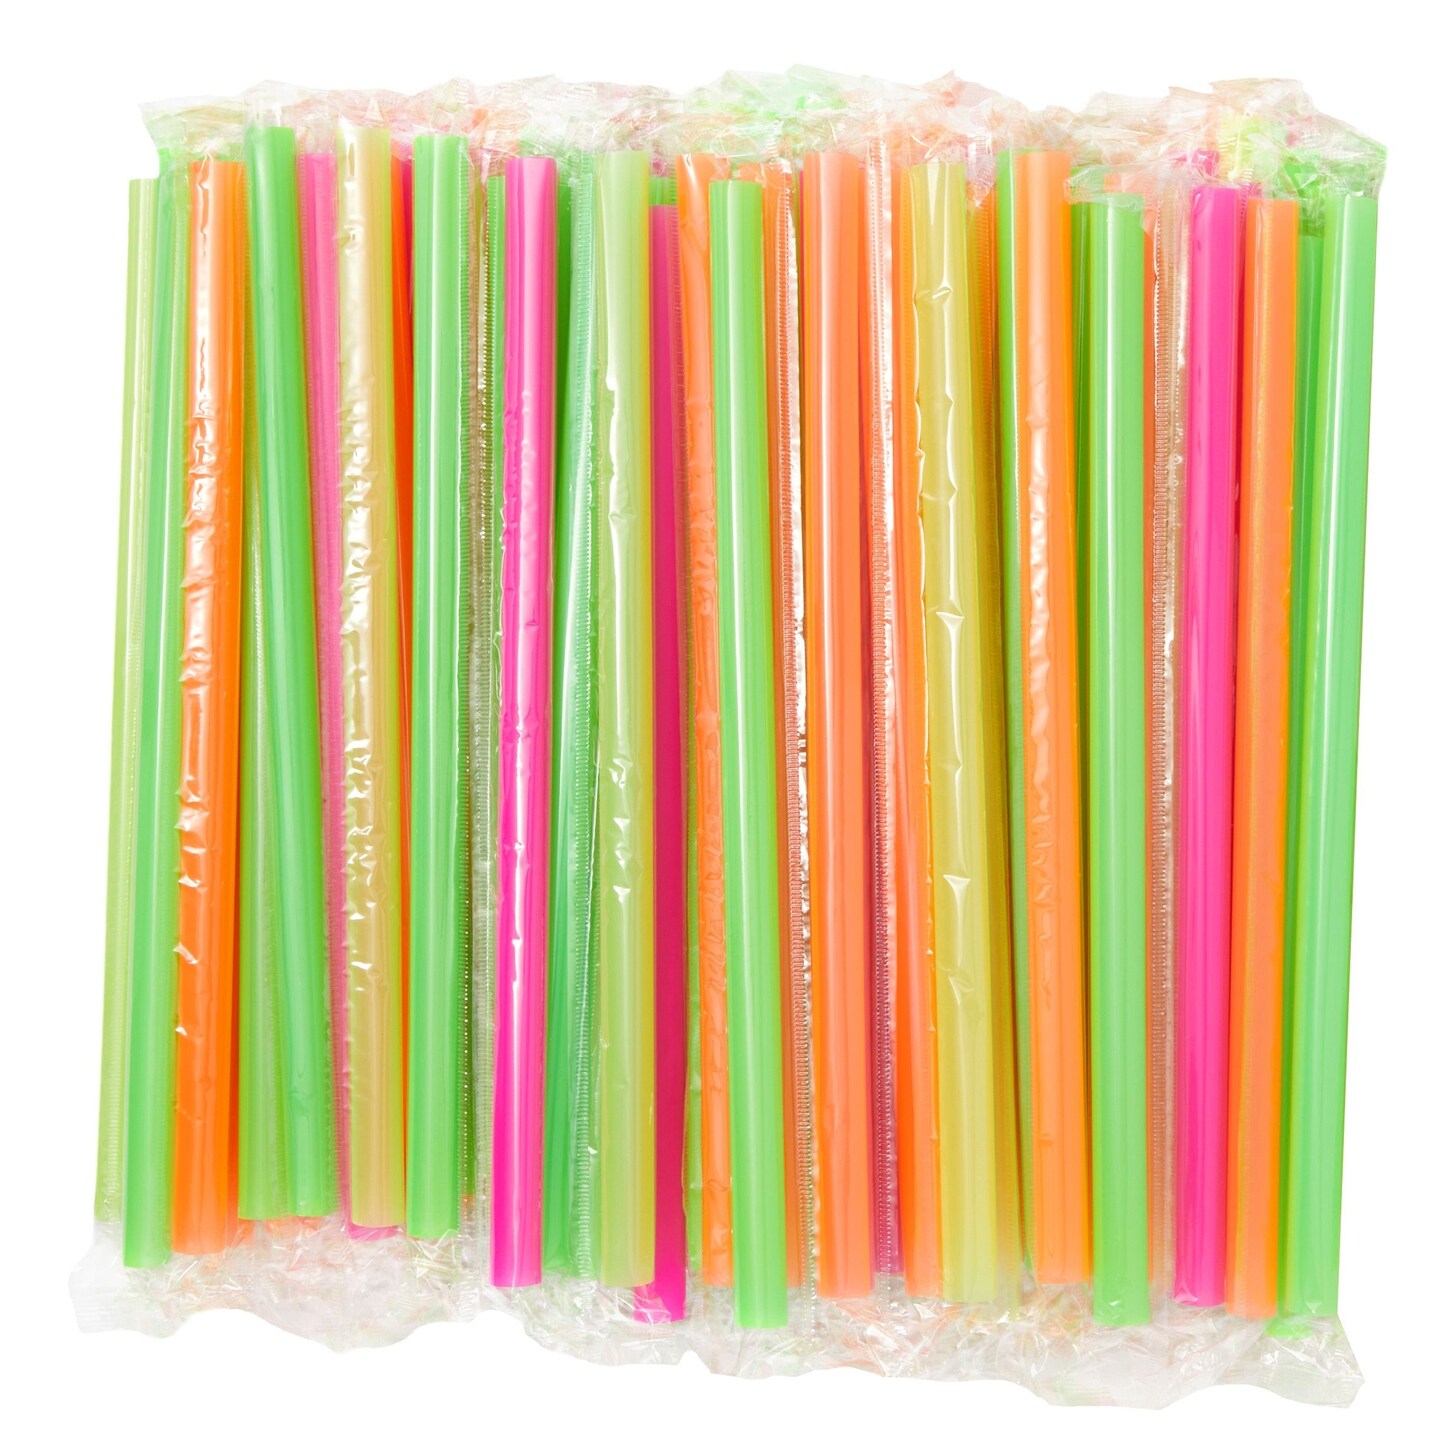 100 Pack Individually Wrapped Tall Straws, Disposable, for Boba, Shakes, Smoothies, 4 Colors (10 Inches)